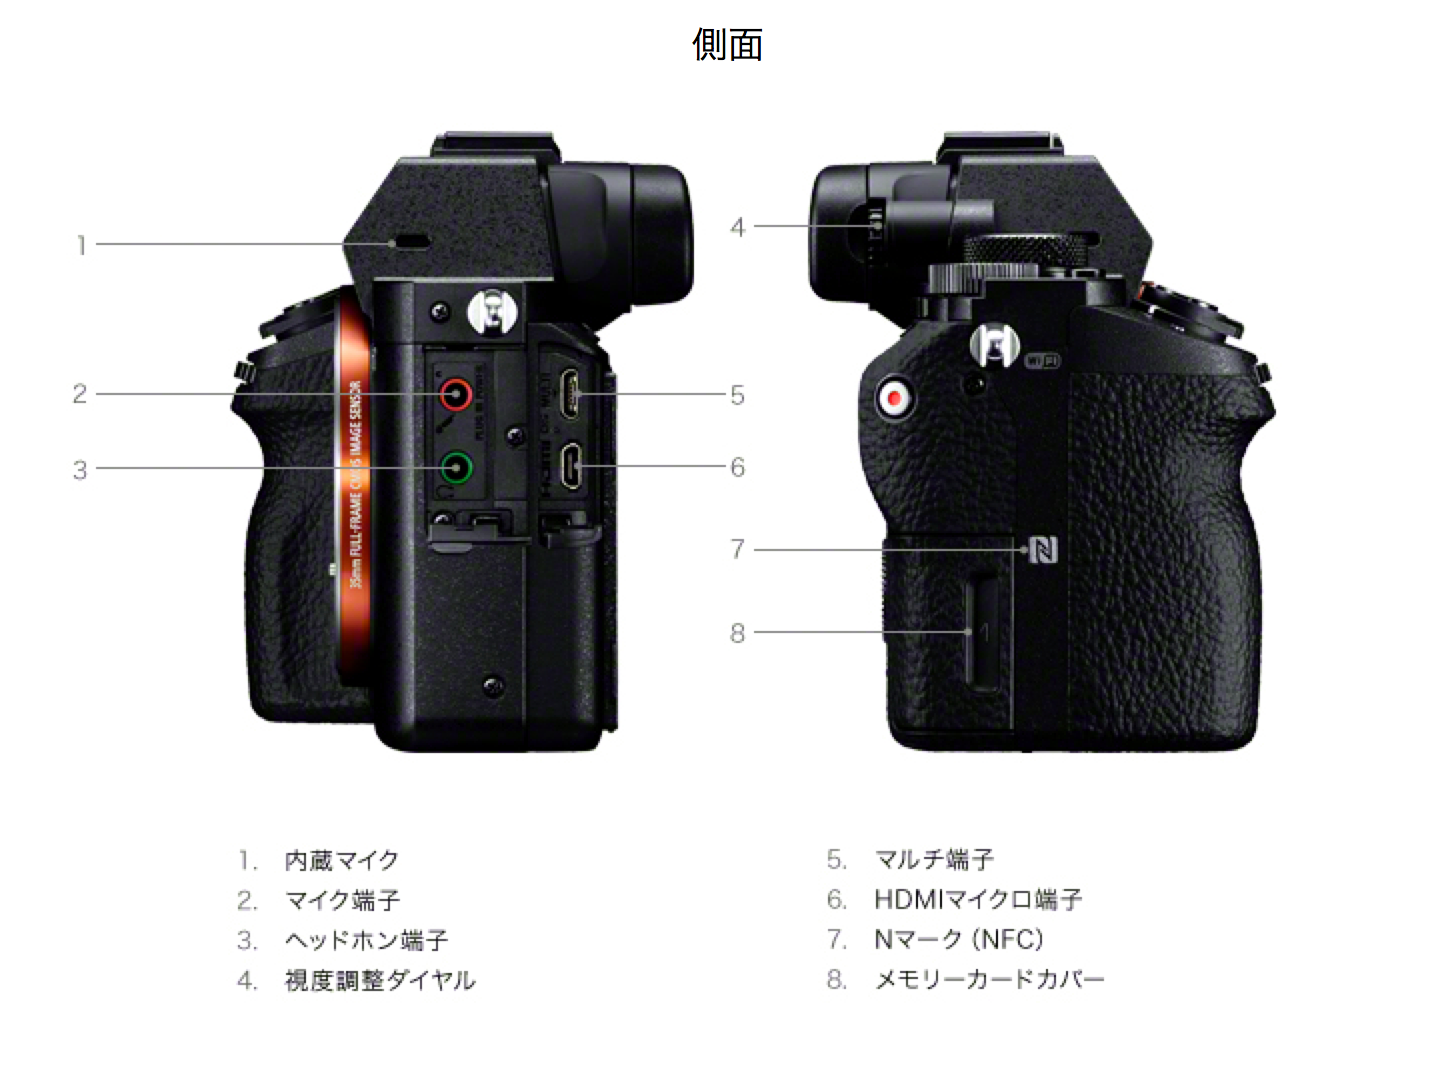 Hot! Sony A7II officially announced in Japan! – sonyalpharumors